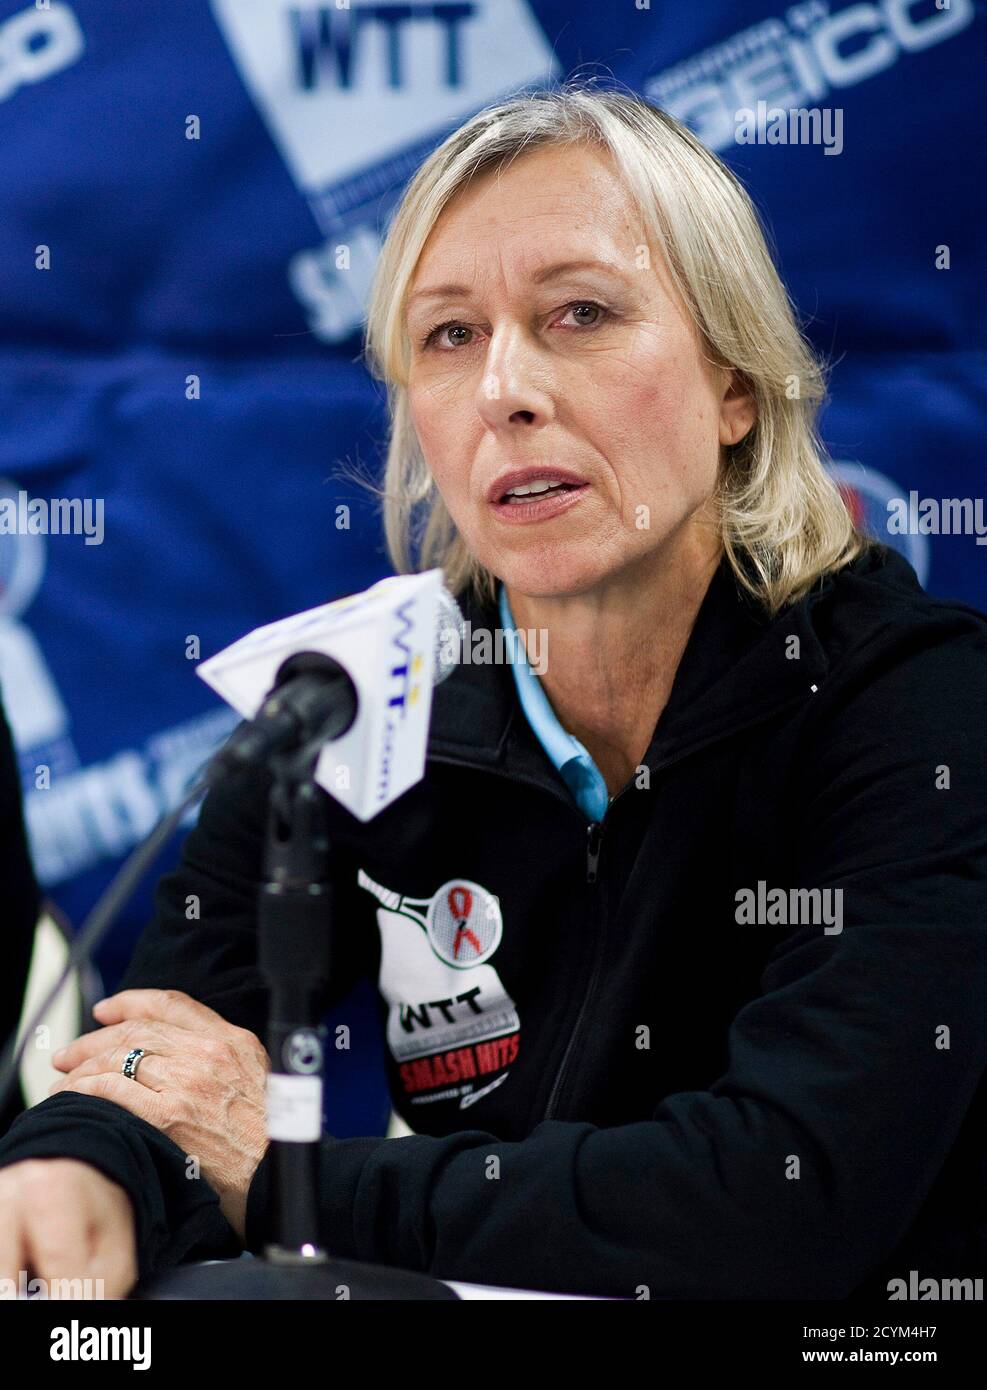 Martina Navratilova speaks at a news conference for the World Team Tennis Smash Hits fundraiser in Washington November 15, 2010. The event will raise money for the Elton John AIDS Foundation and local Washington, D.C. Area AIDS charities, according to the World Team Tennis website. REUTERS/Joshua Roberts  (UNITED STATES - Tags: SPORT ENTERTAINMENT TENNIS) Stock Photo